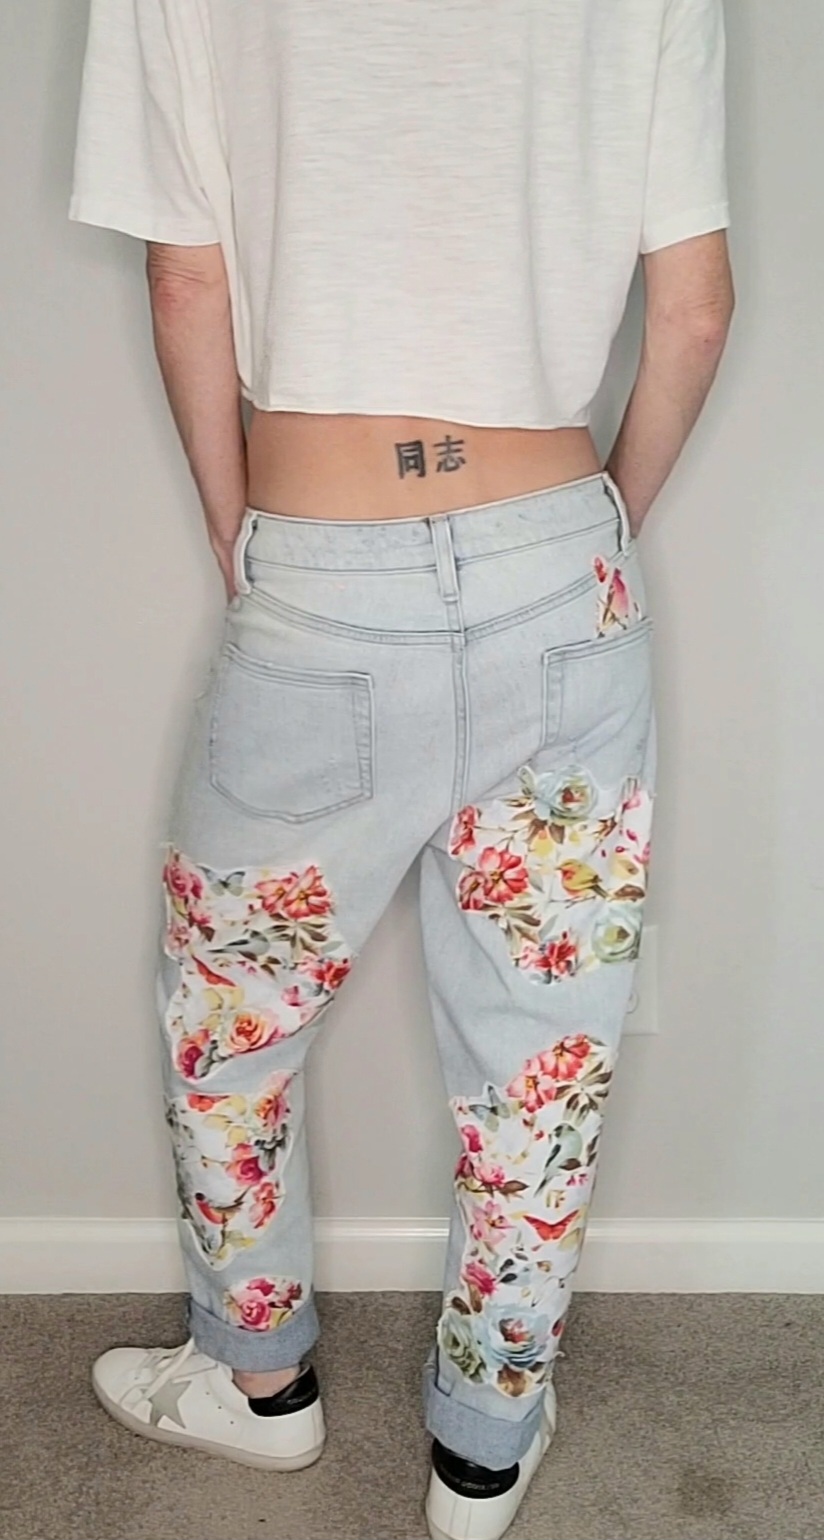 the back of a woman wearing floral printed jeans.